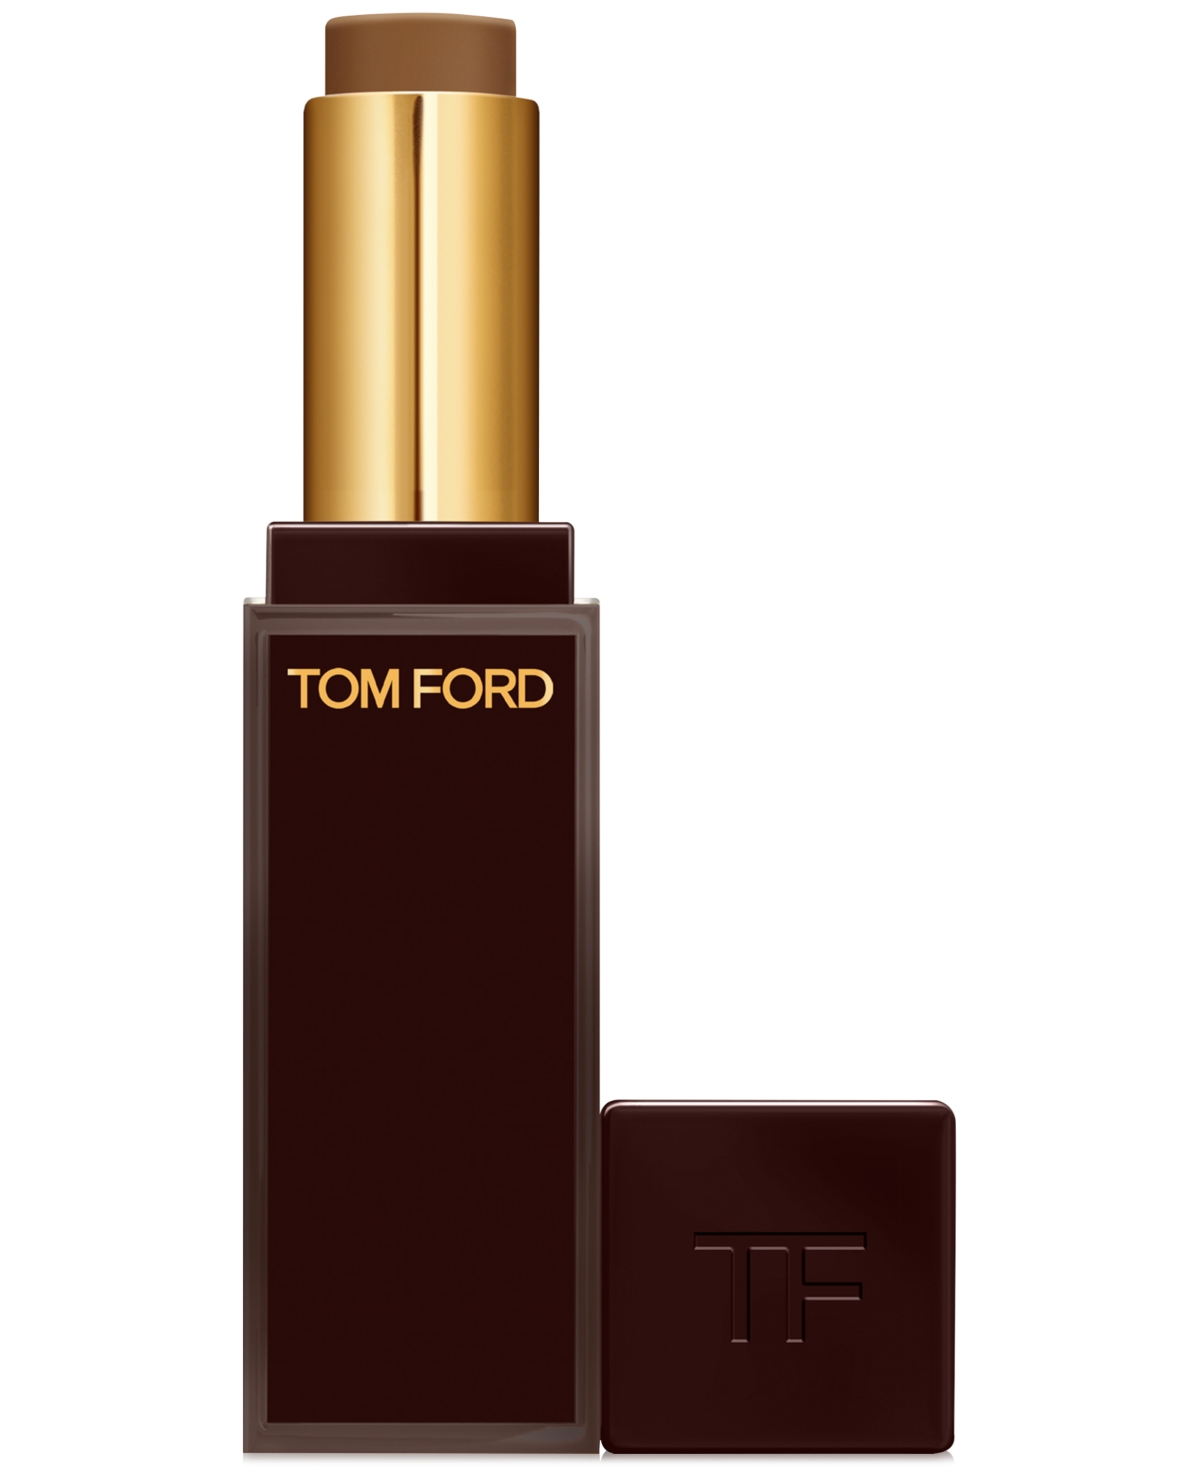 Tom Ford Traceless Soft Matte Concealer In C Rich Mocha (very Deep Skin With Rich R